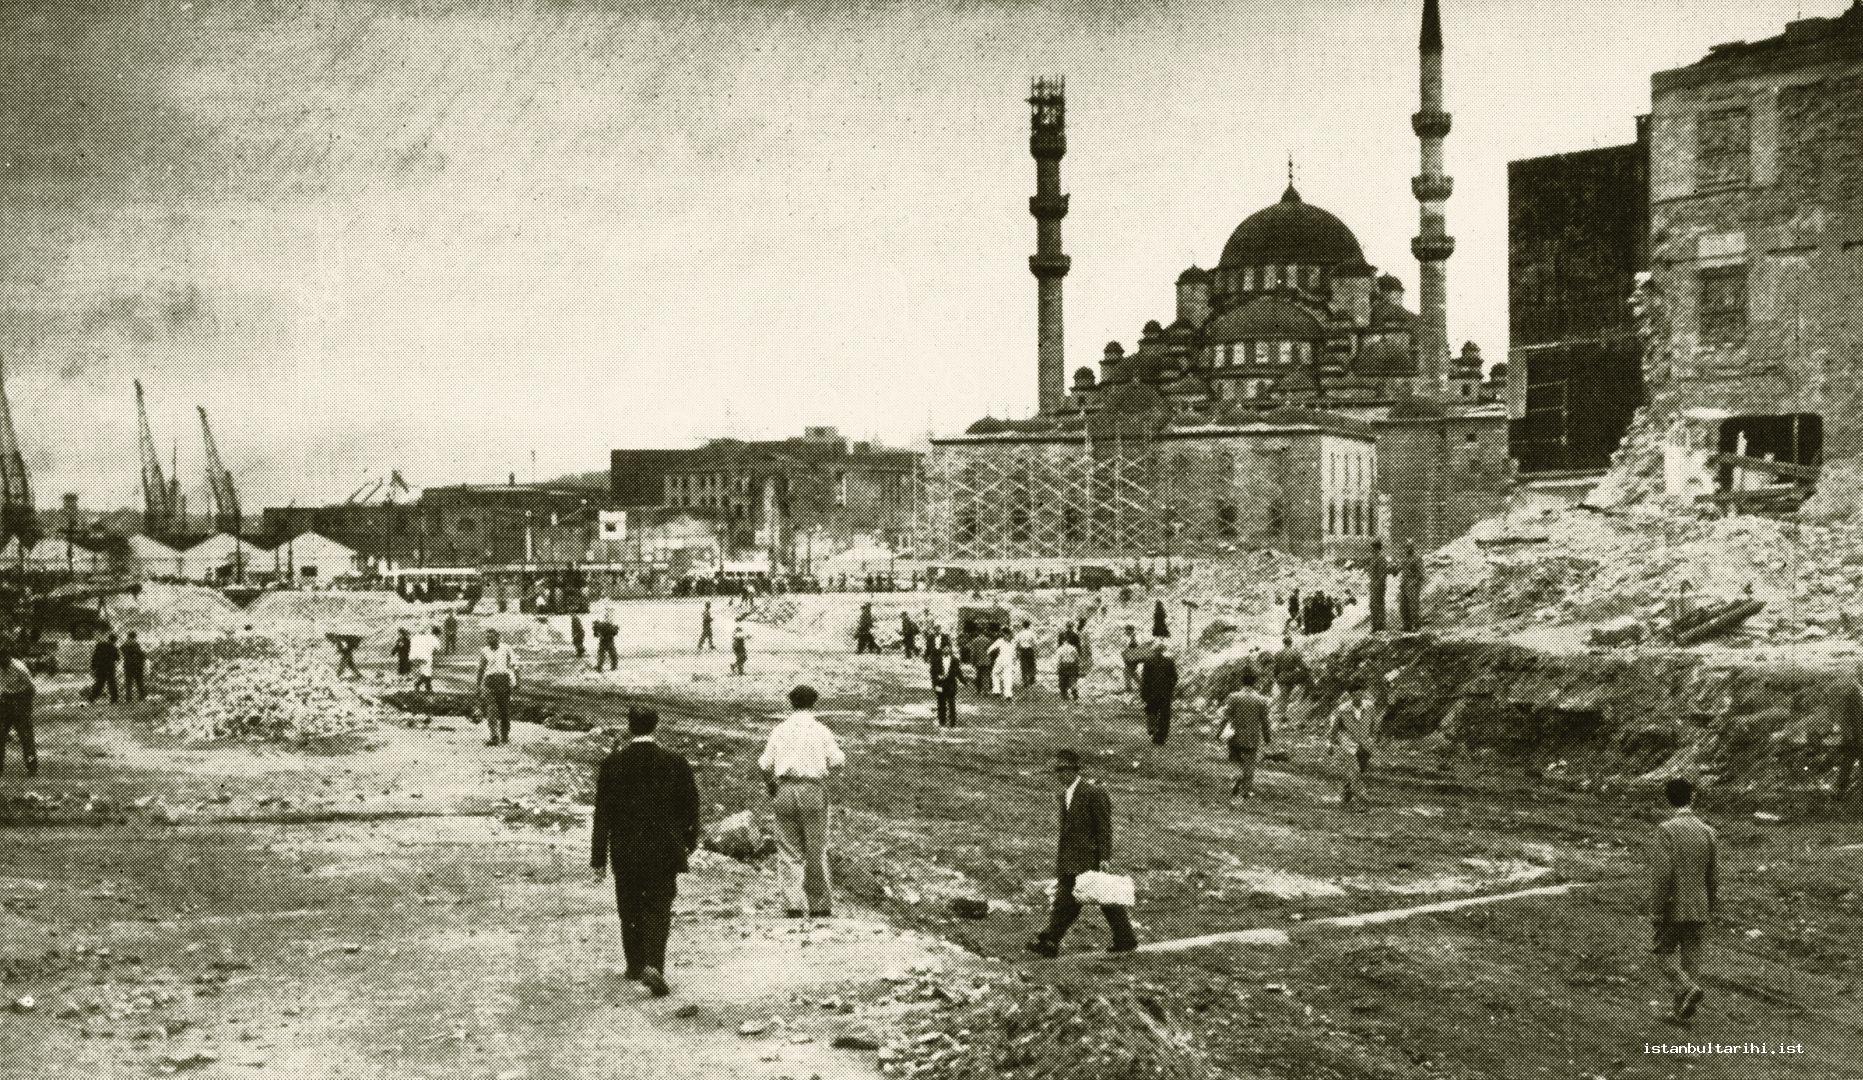 8- A scene from the street between Eminönü and Unkapanı after the demolition of Fish Market. The empty space in the front used to be occupied by Fish Market, one of  the colorful corners of old Istanbul.